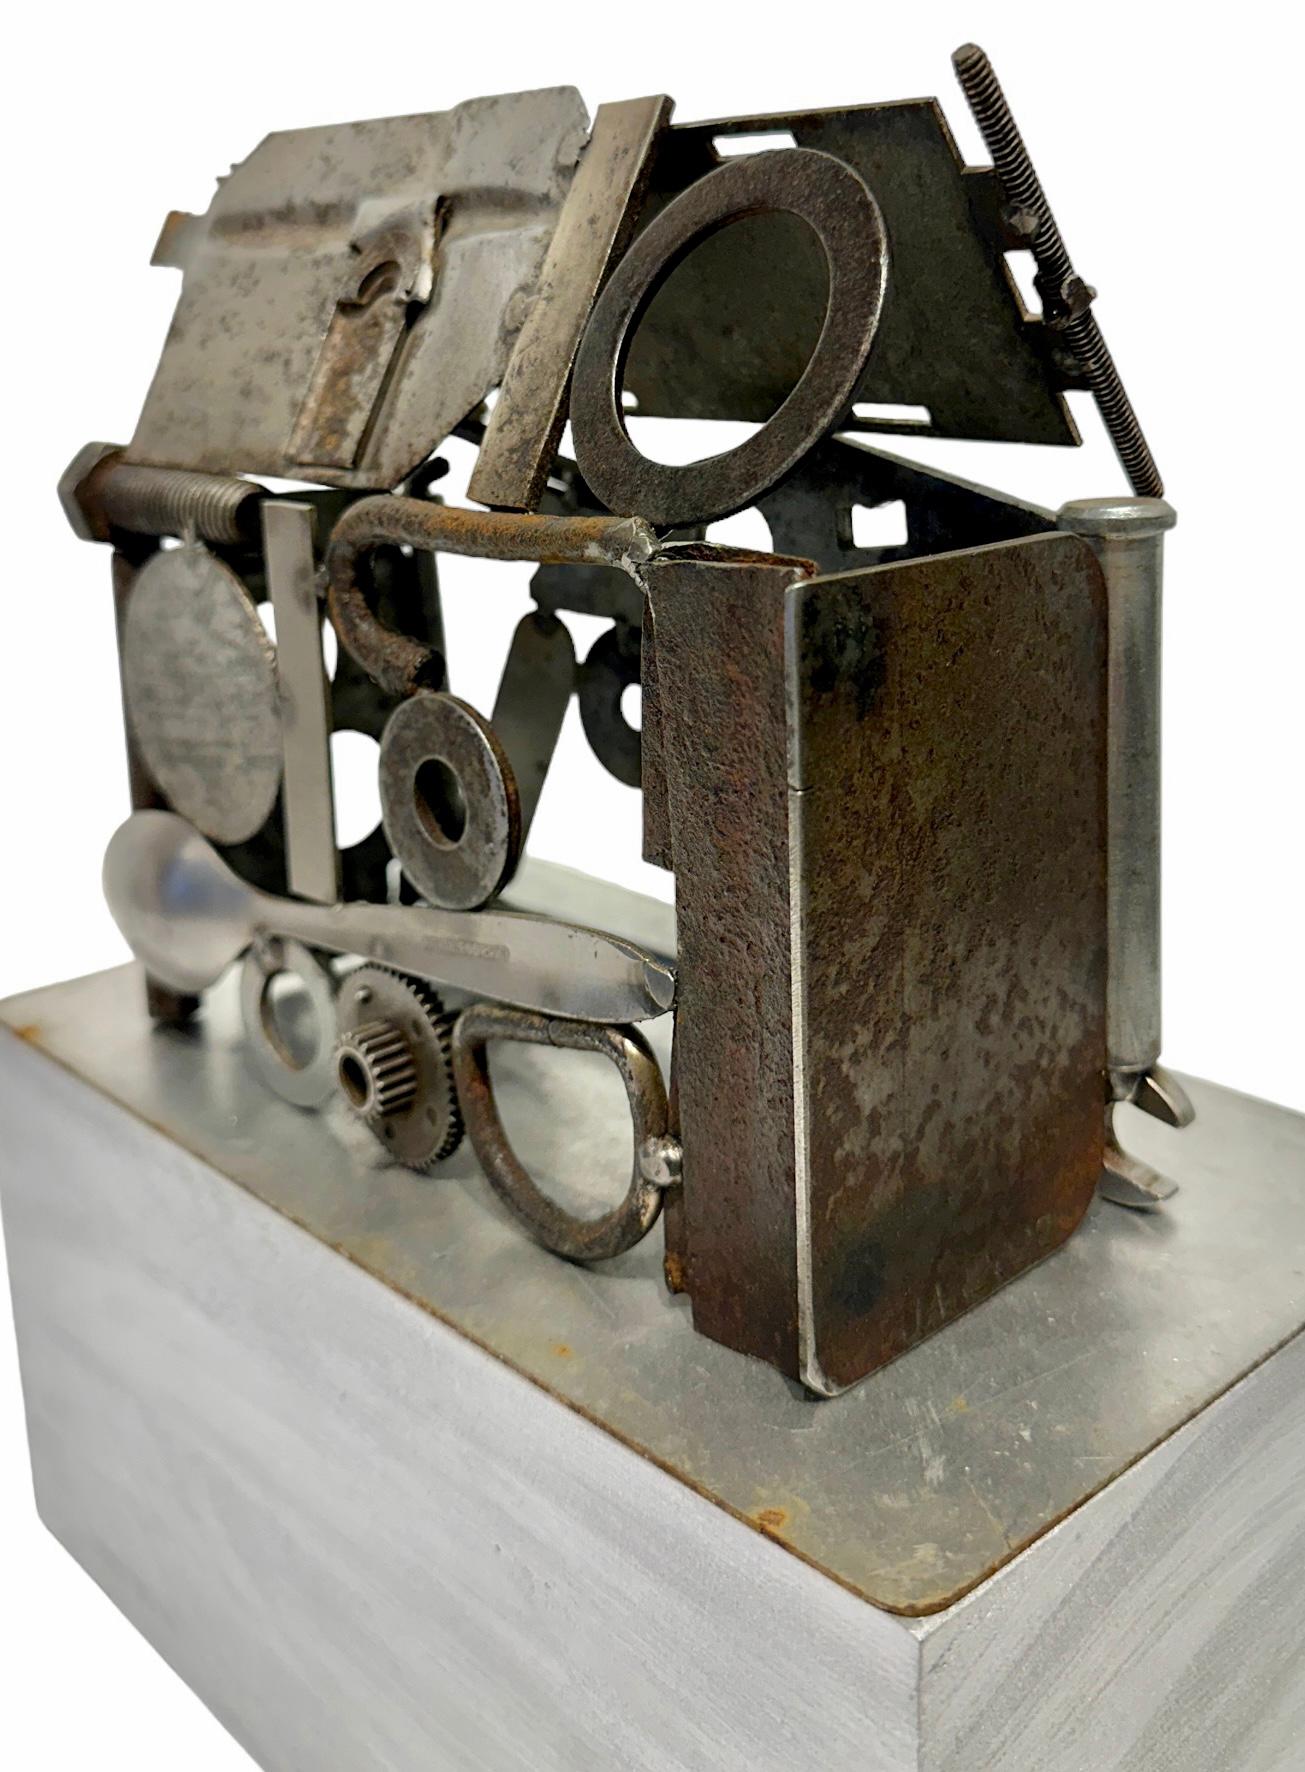 American Jim Rose - Construct No. 03, Salvaged Steel and Aluminum Industrial Objects For Sale